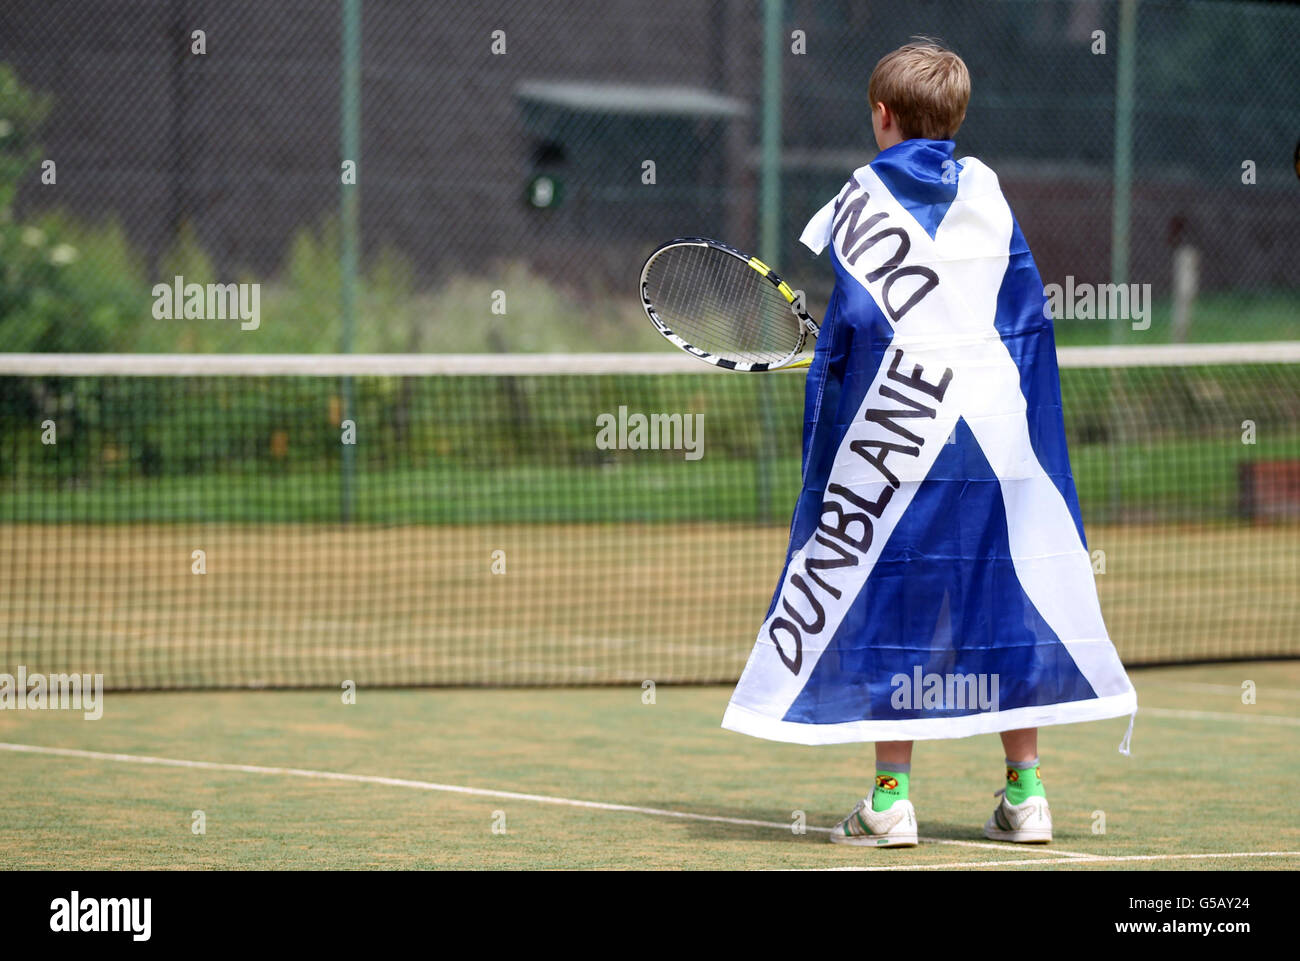 Dunblane Tennis Club member (name unknown) plays tennis during the match, as the streets in Andy Murray's hometown are almost deserted as tennis fans gather to watch his bid to become the first British man to win Wimbledon in 76 years. Stock Photo